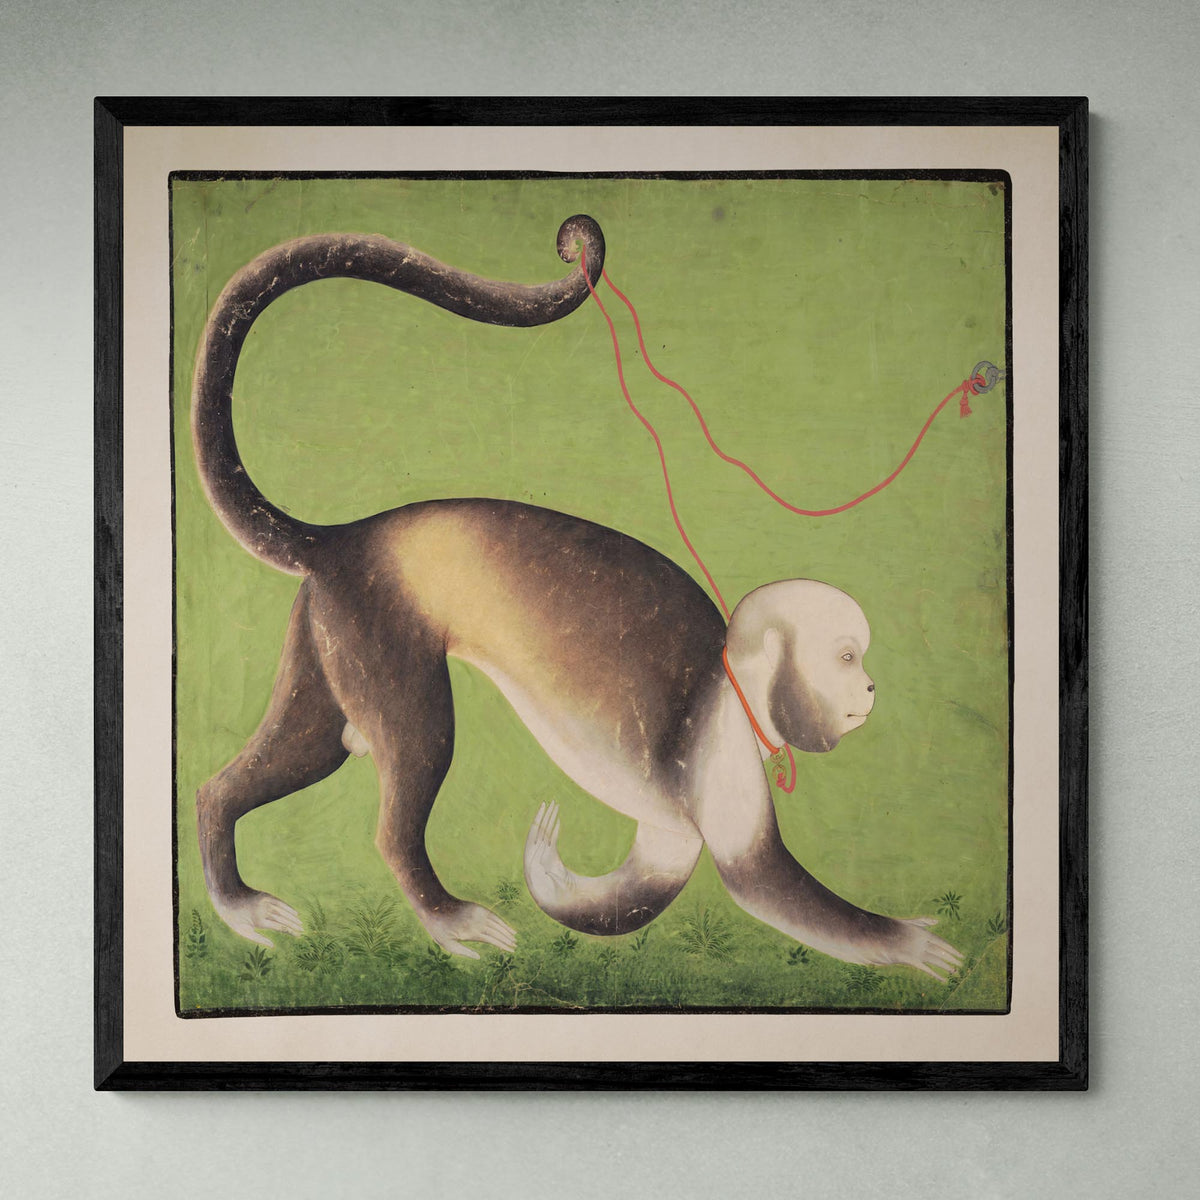 giclee 6&quot;x6&quot; A Monumental Portrait of a Monkey, Rajasthan, Antique India Ape Surreal Asian Green Woodblock Fine Art Print